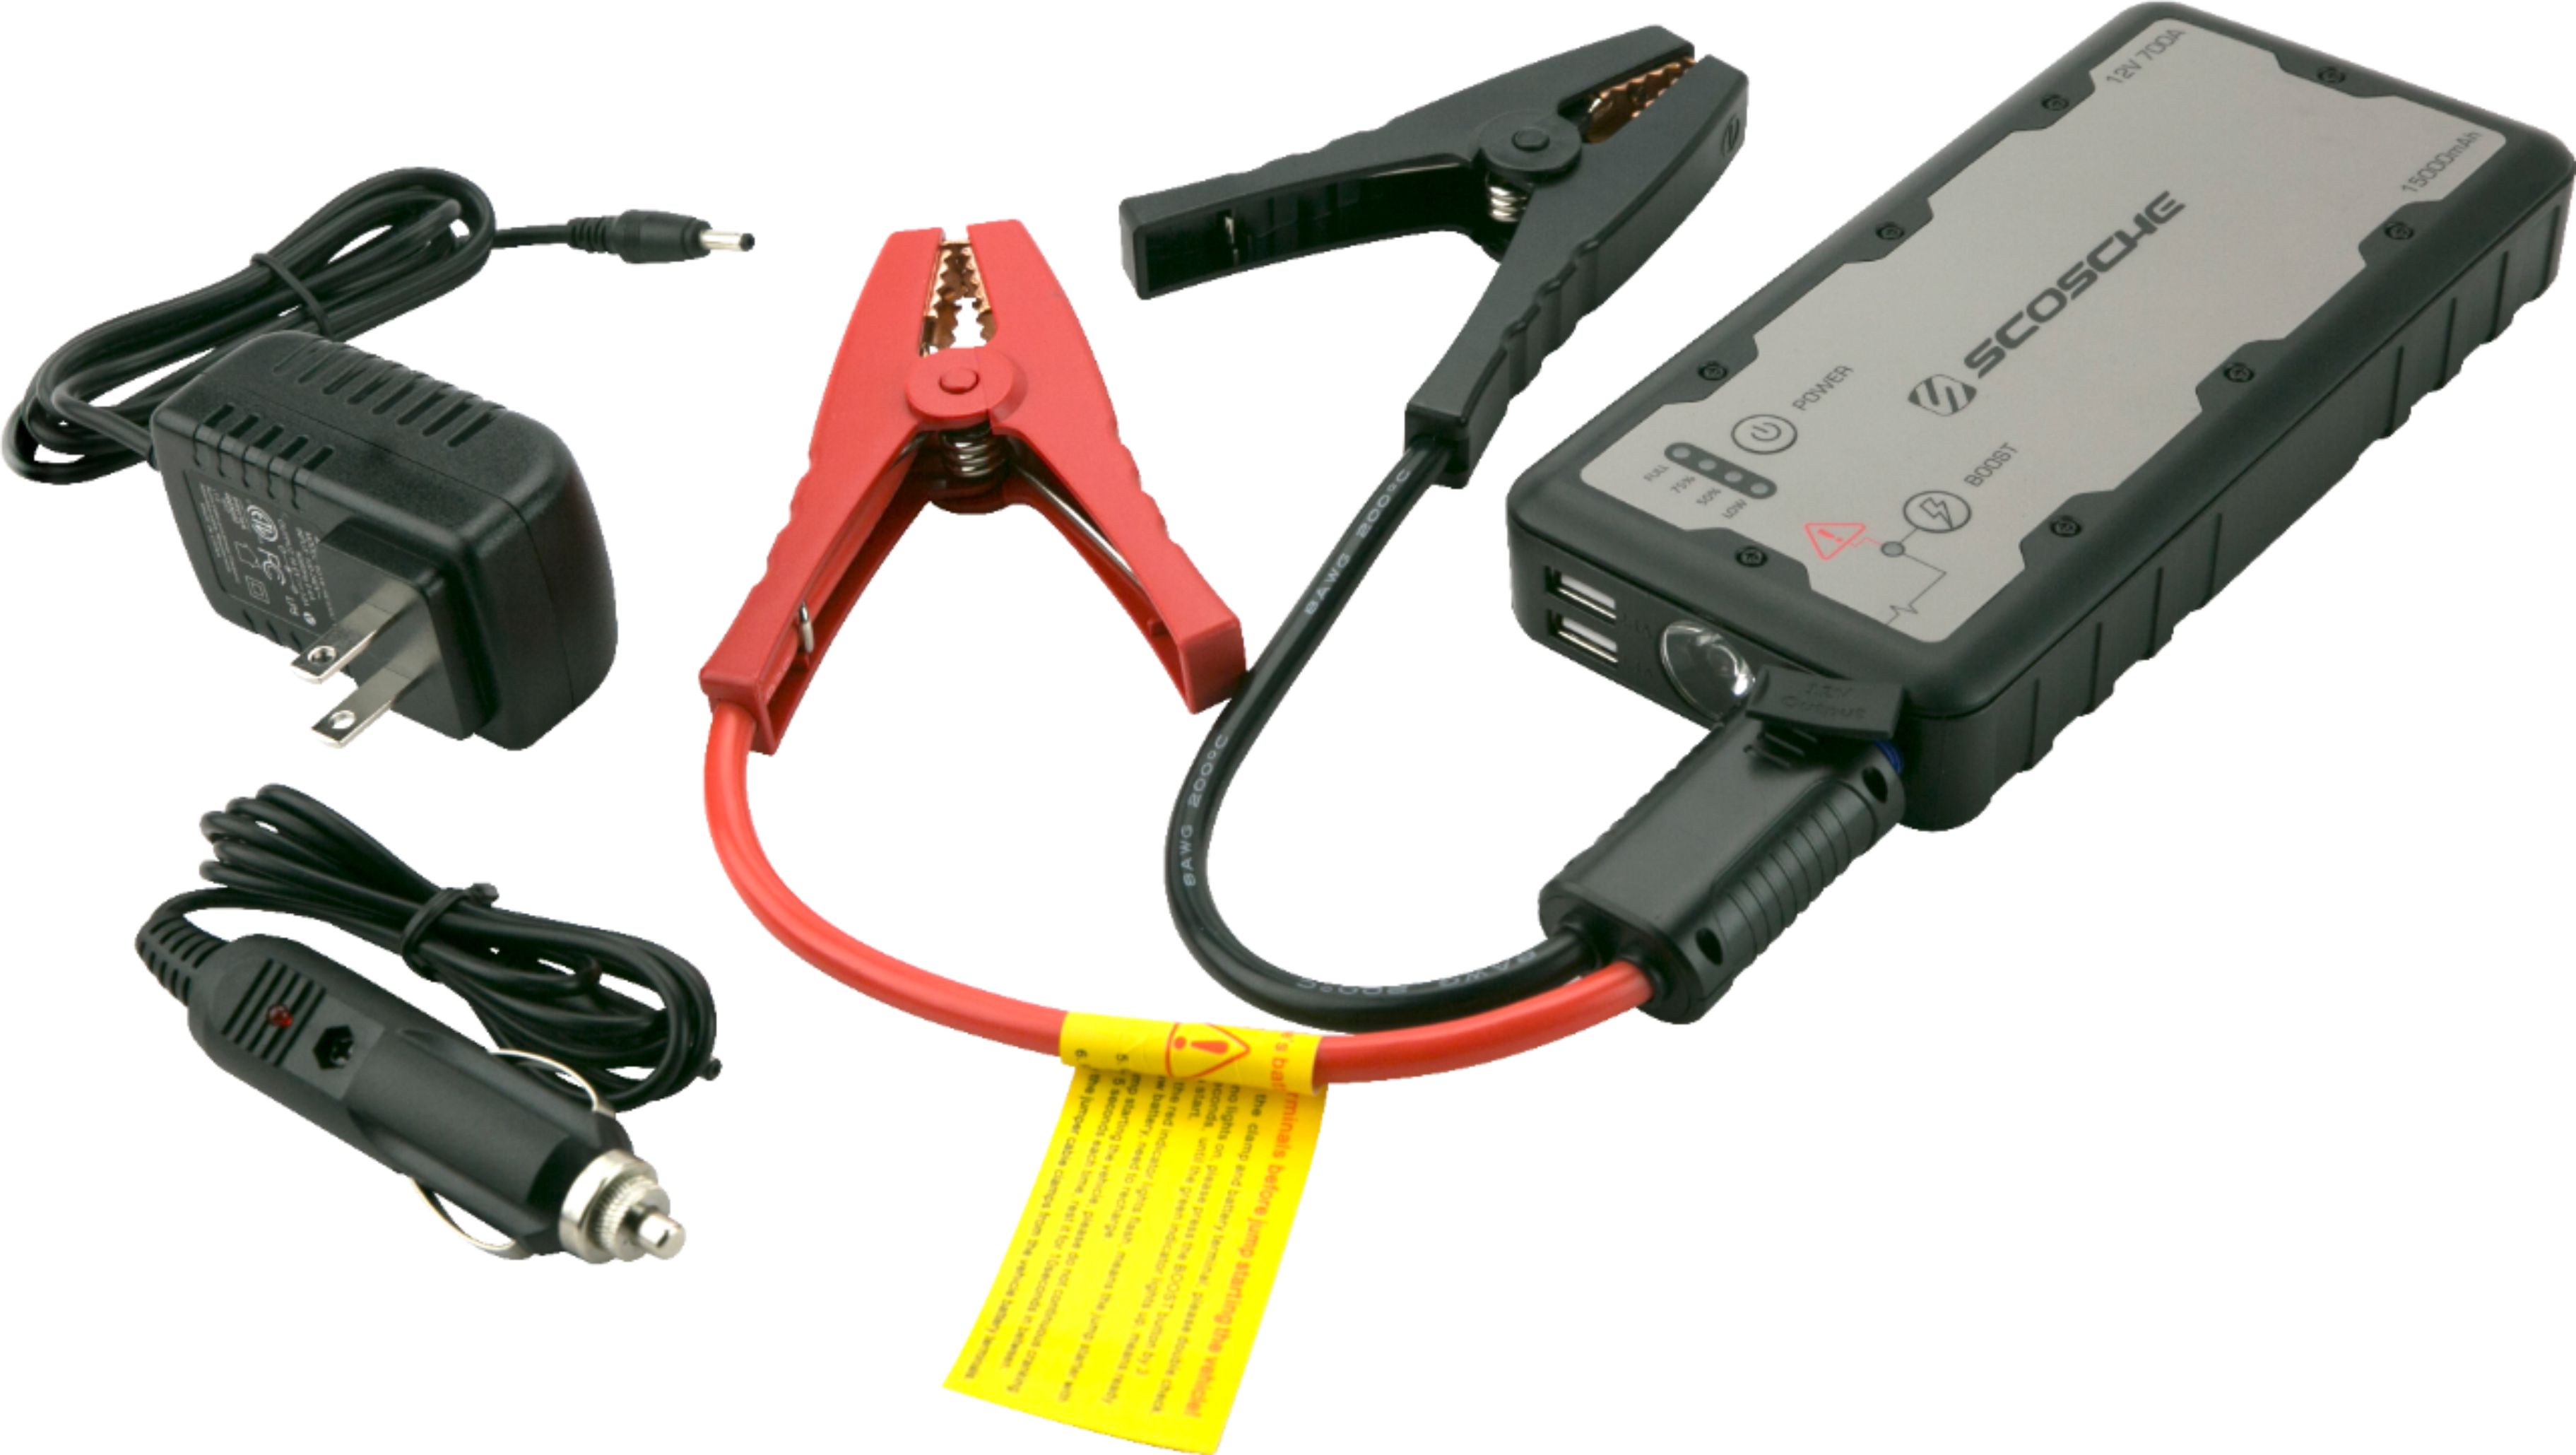 Black & Decker Automotive Battery Chargers & Jump Starters for sale